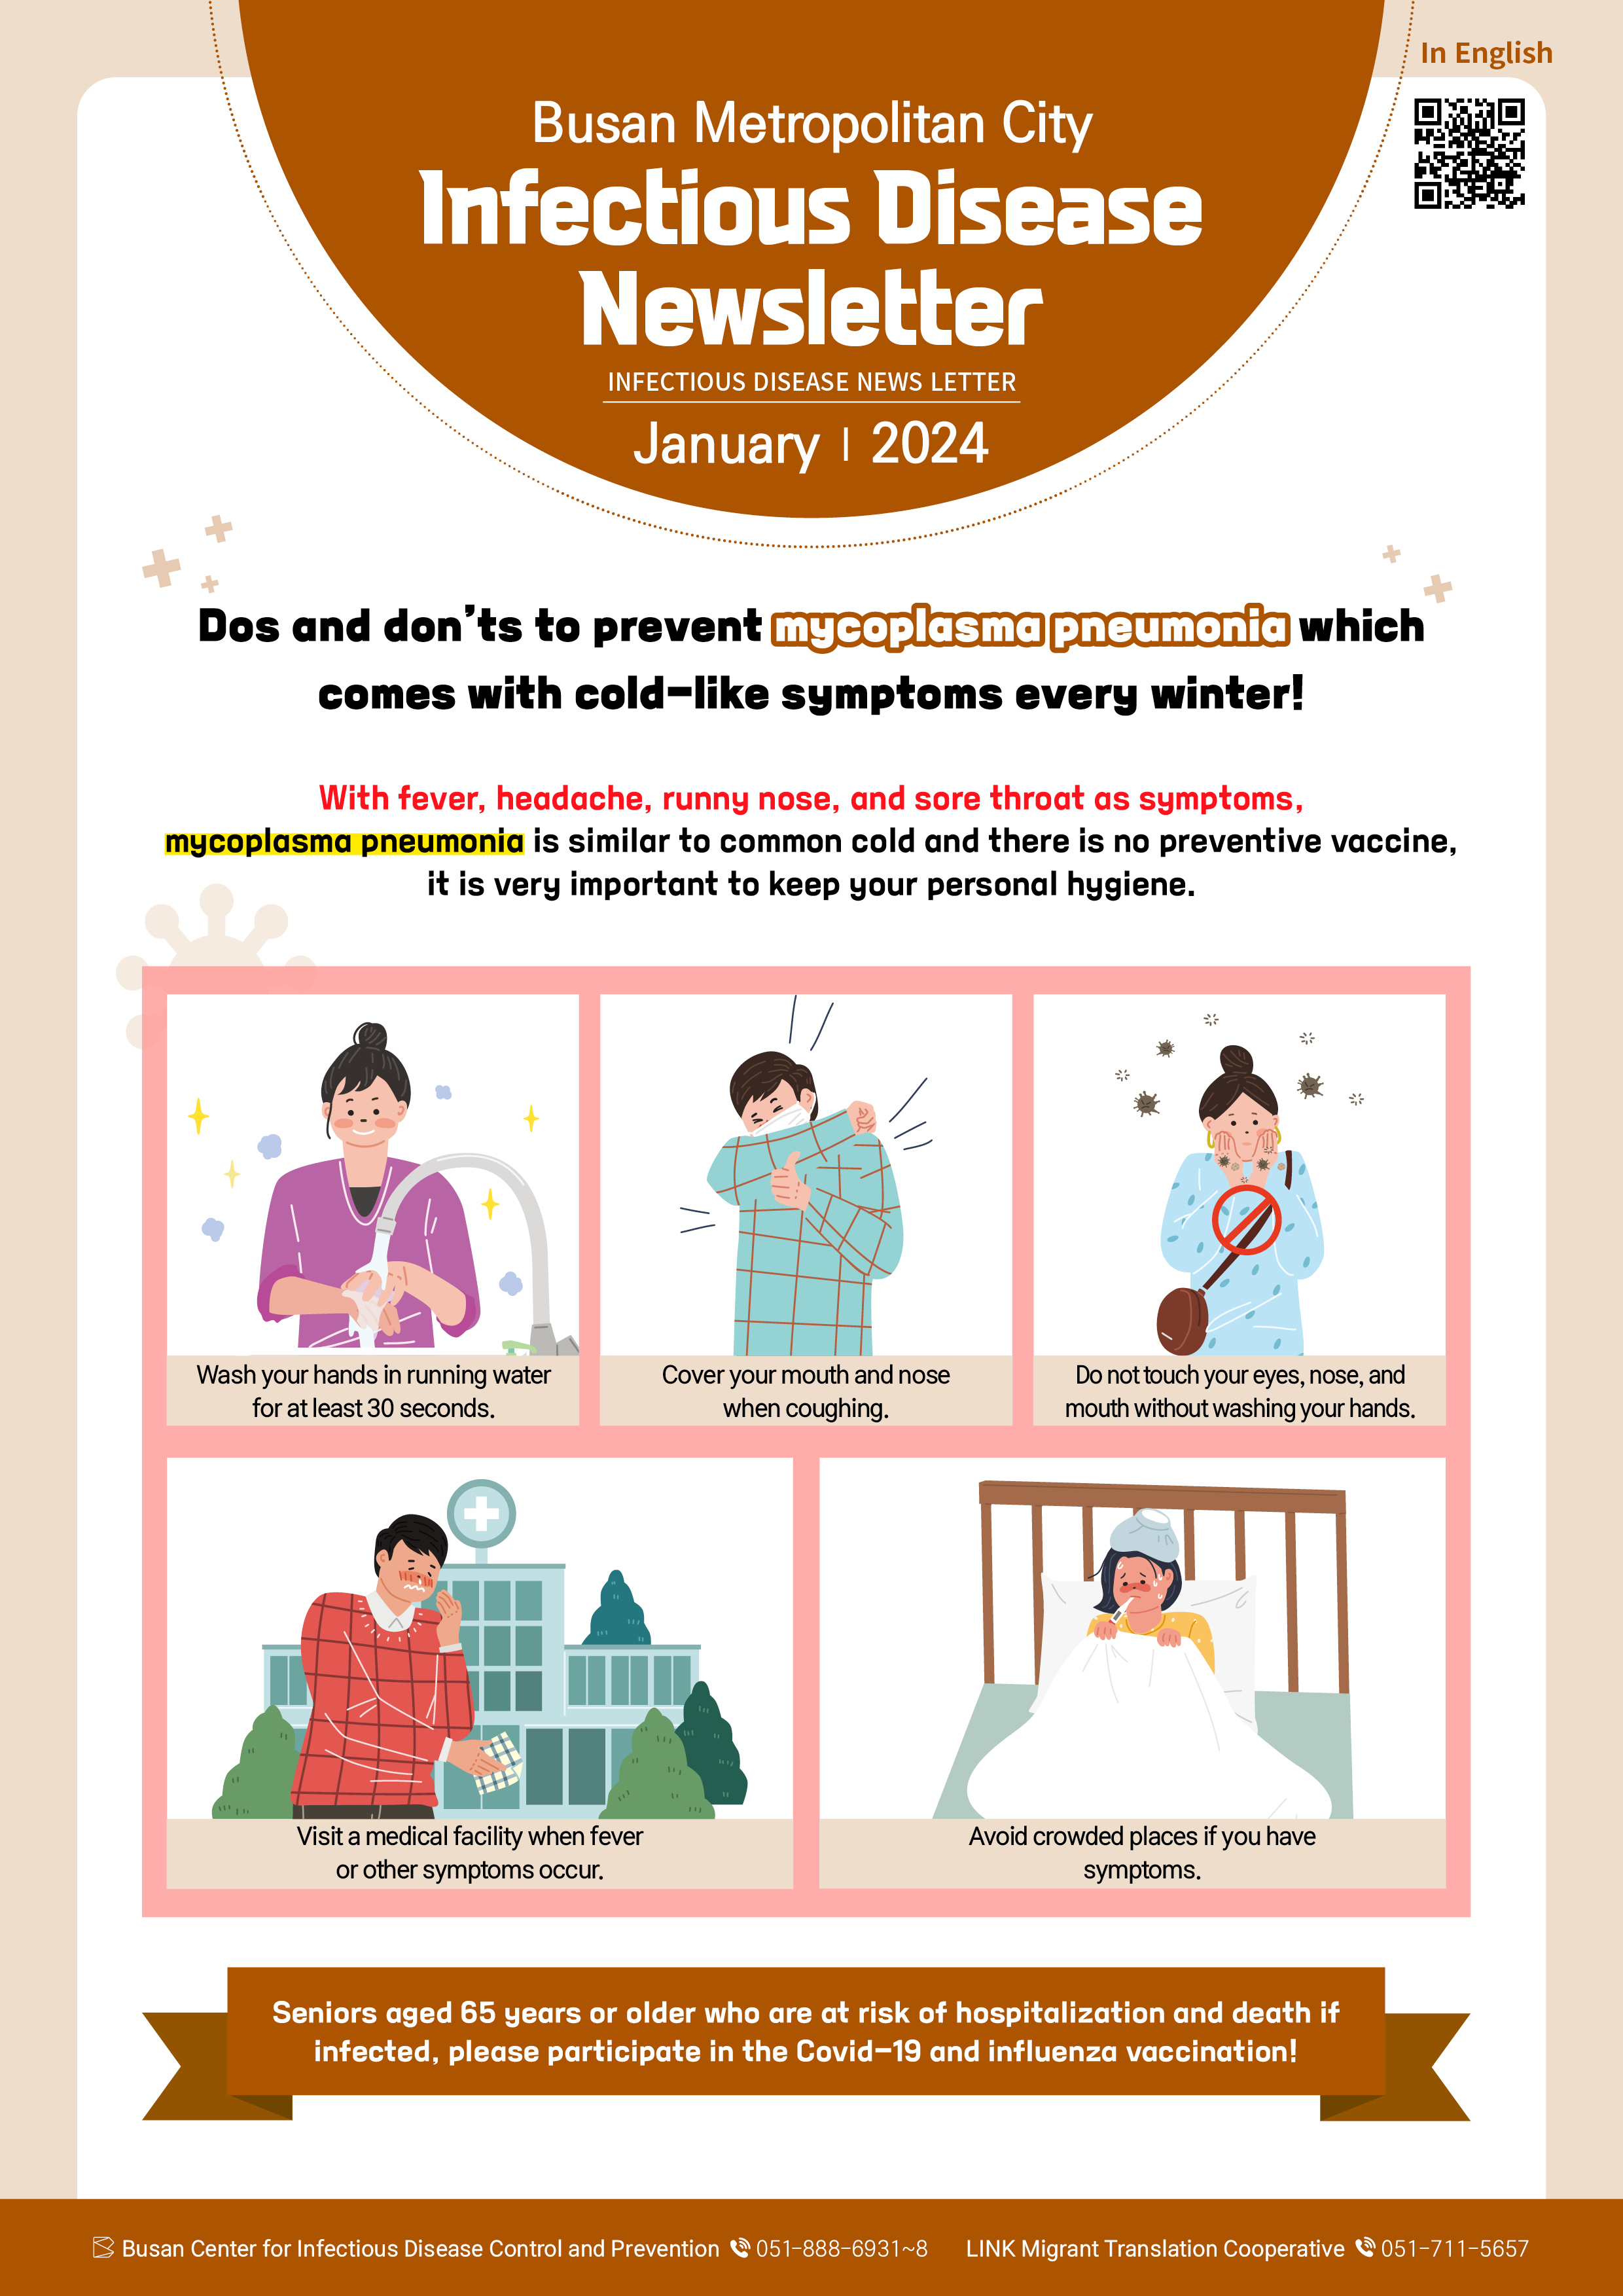 Infectious Disease Newsletter (Jan. 2024) in English